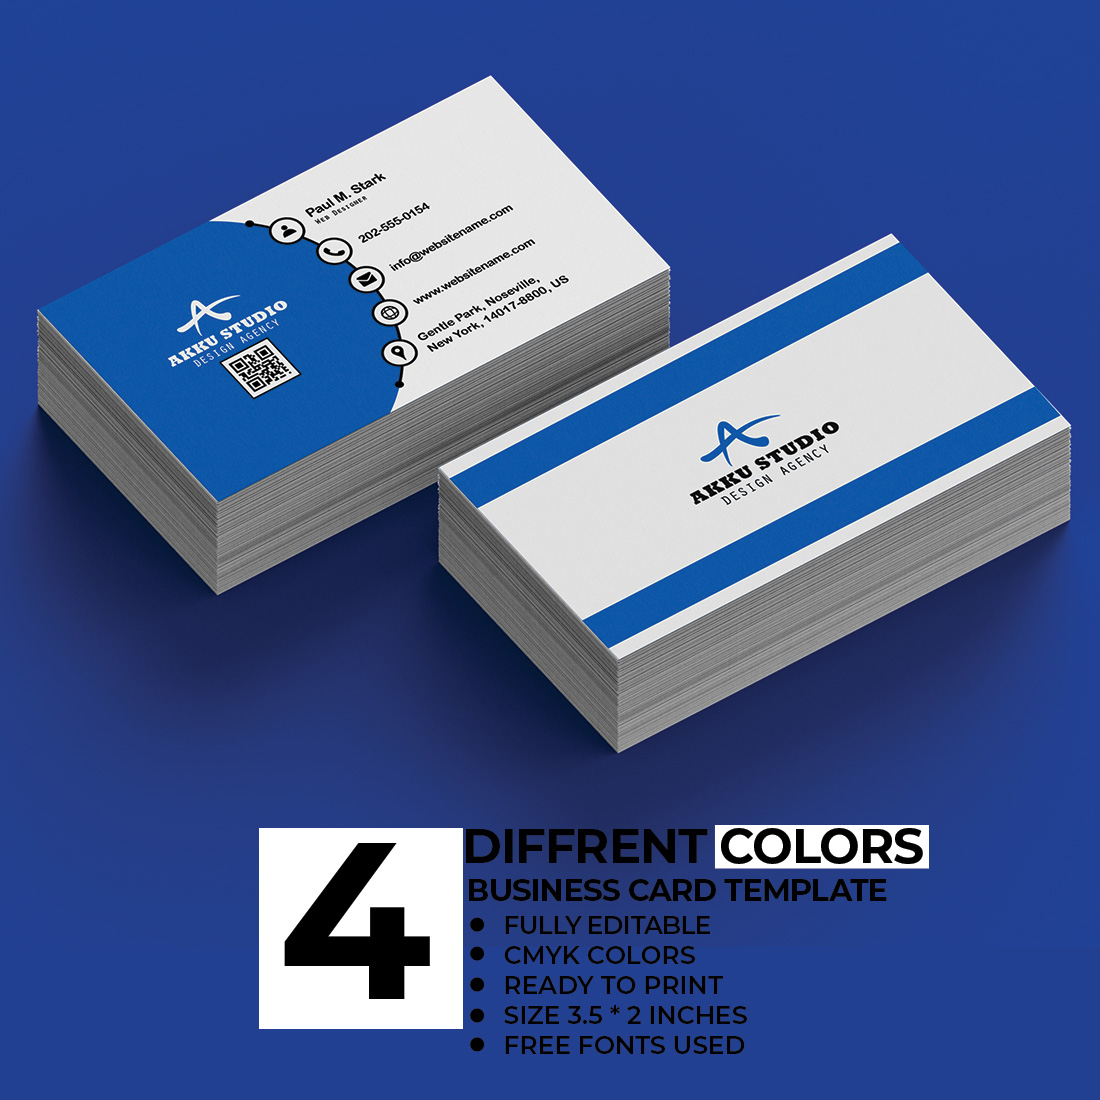 Business Card Design 4 Color cover image.